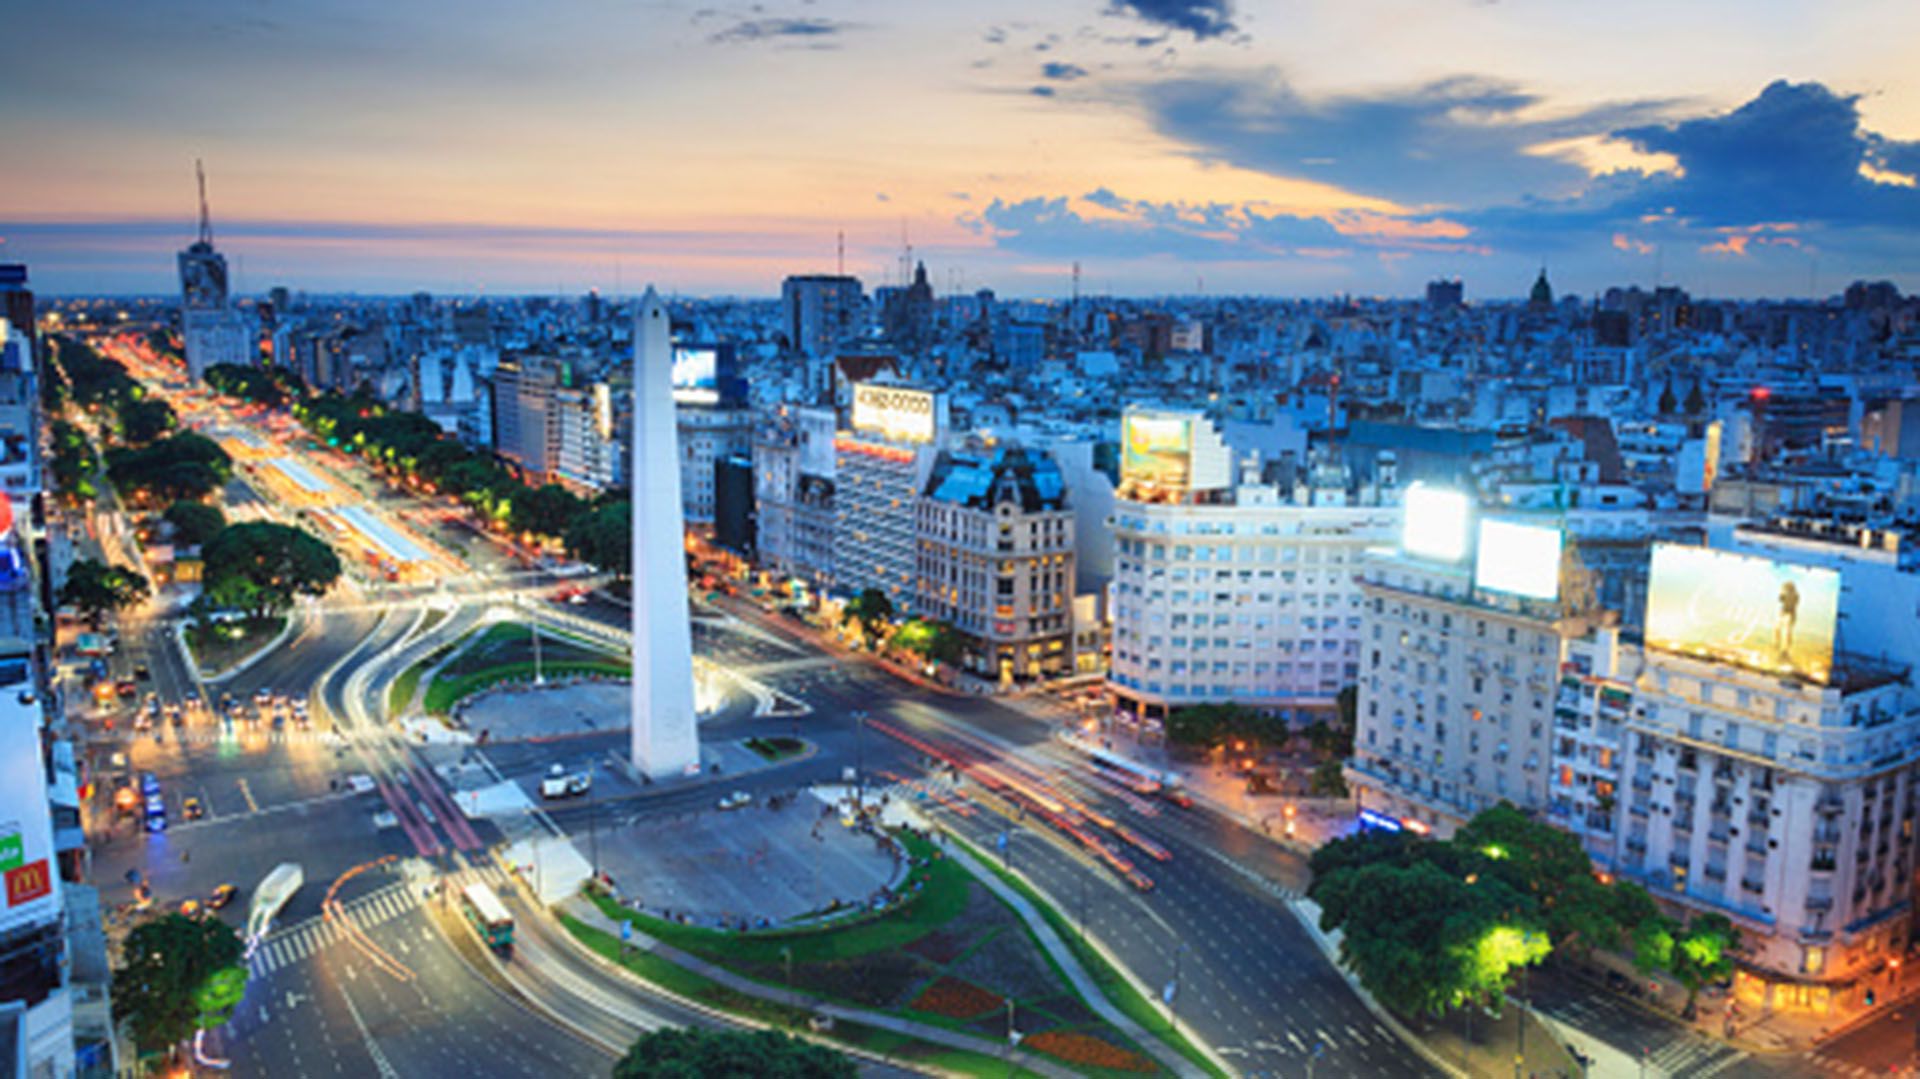 Argentina, Buenos Aires, Elevated view of Avenida 9 de Julio and Obelisk at sunset